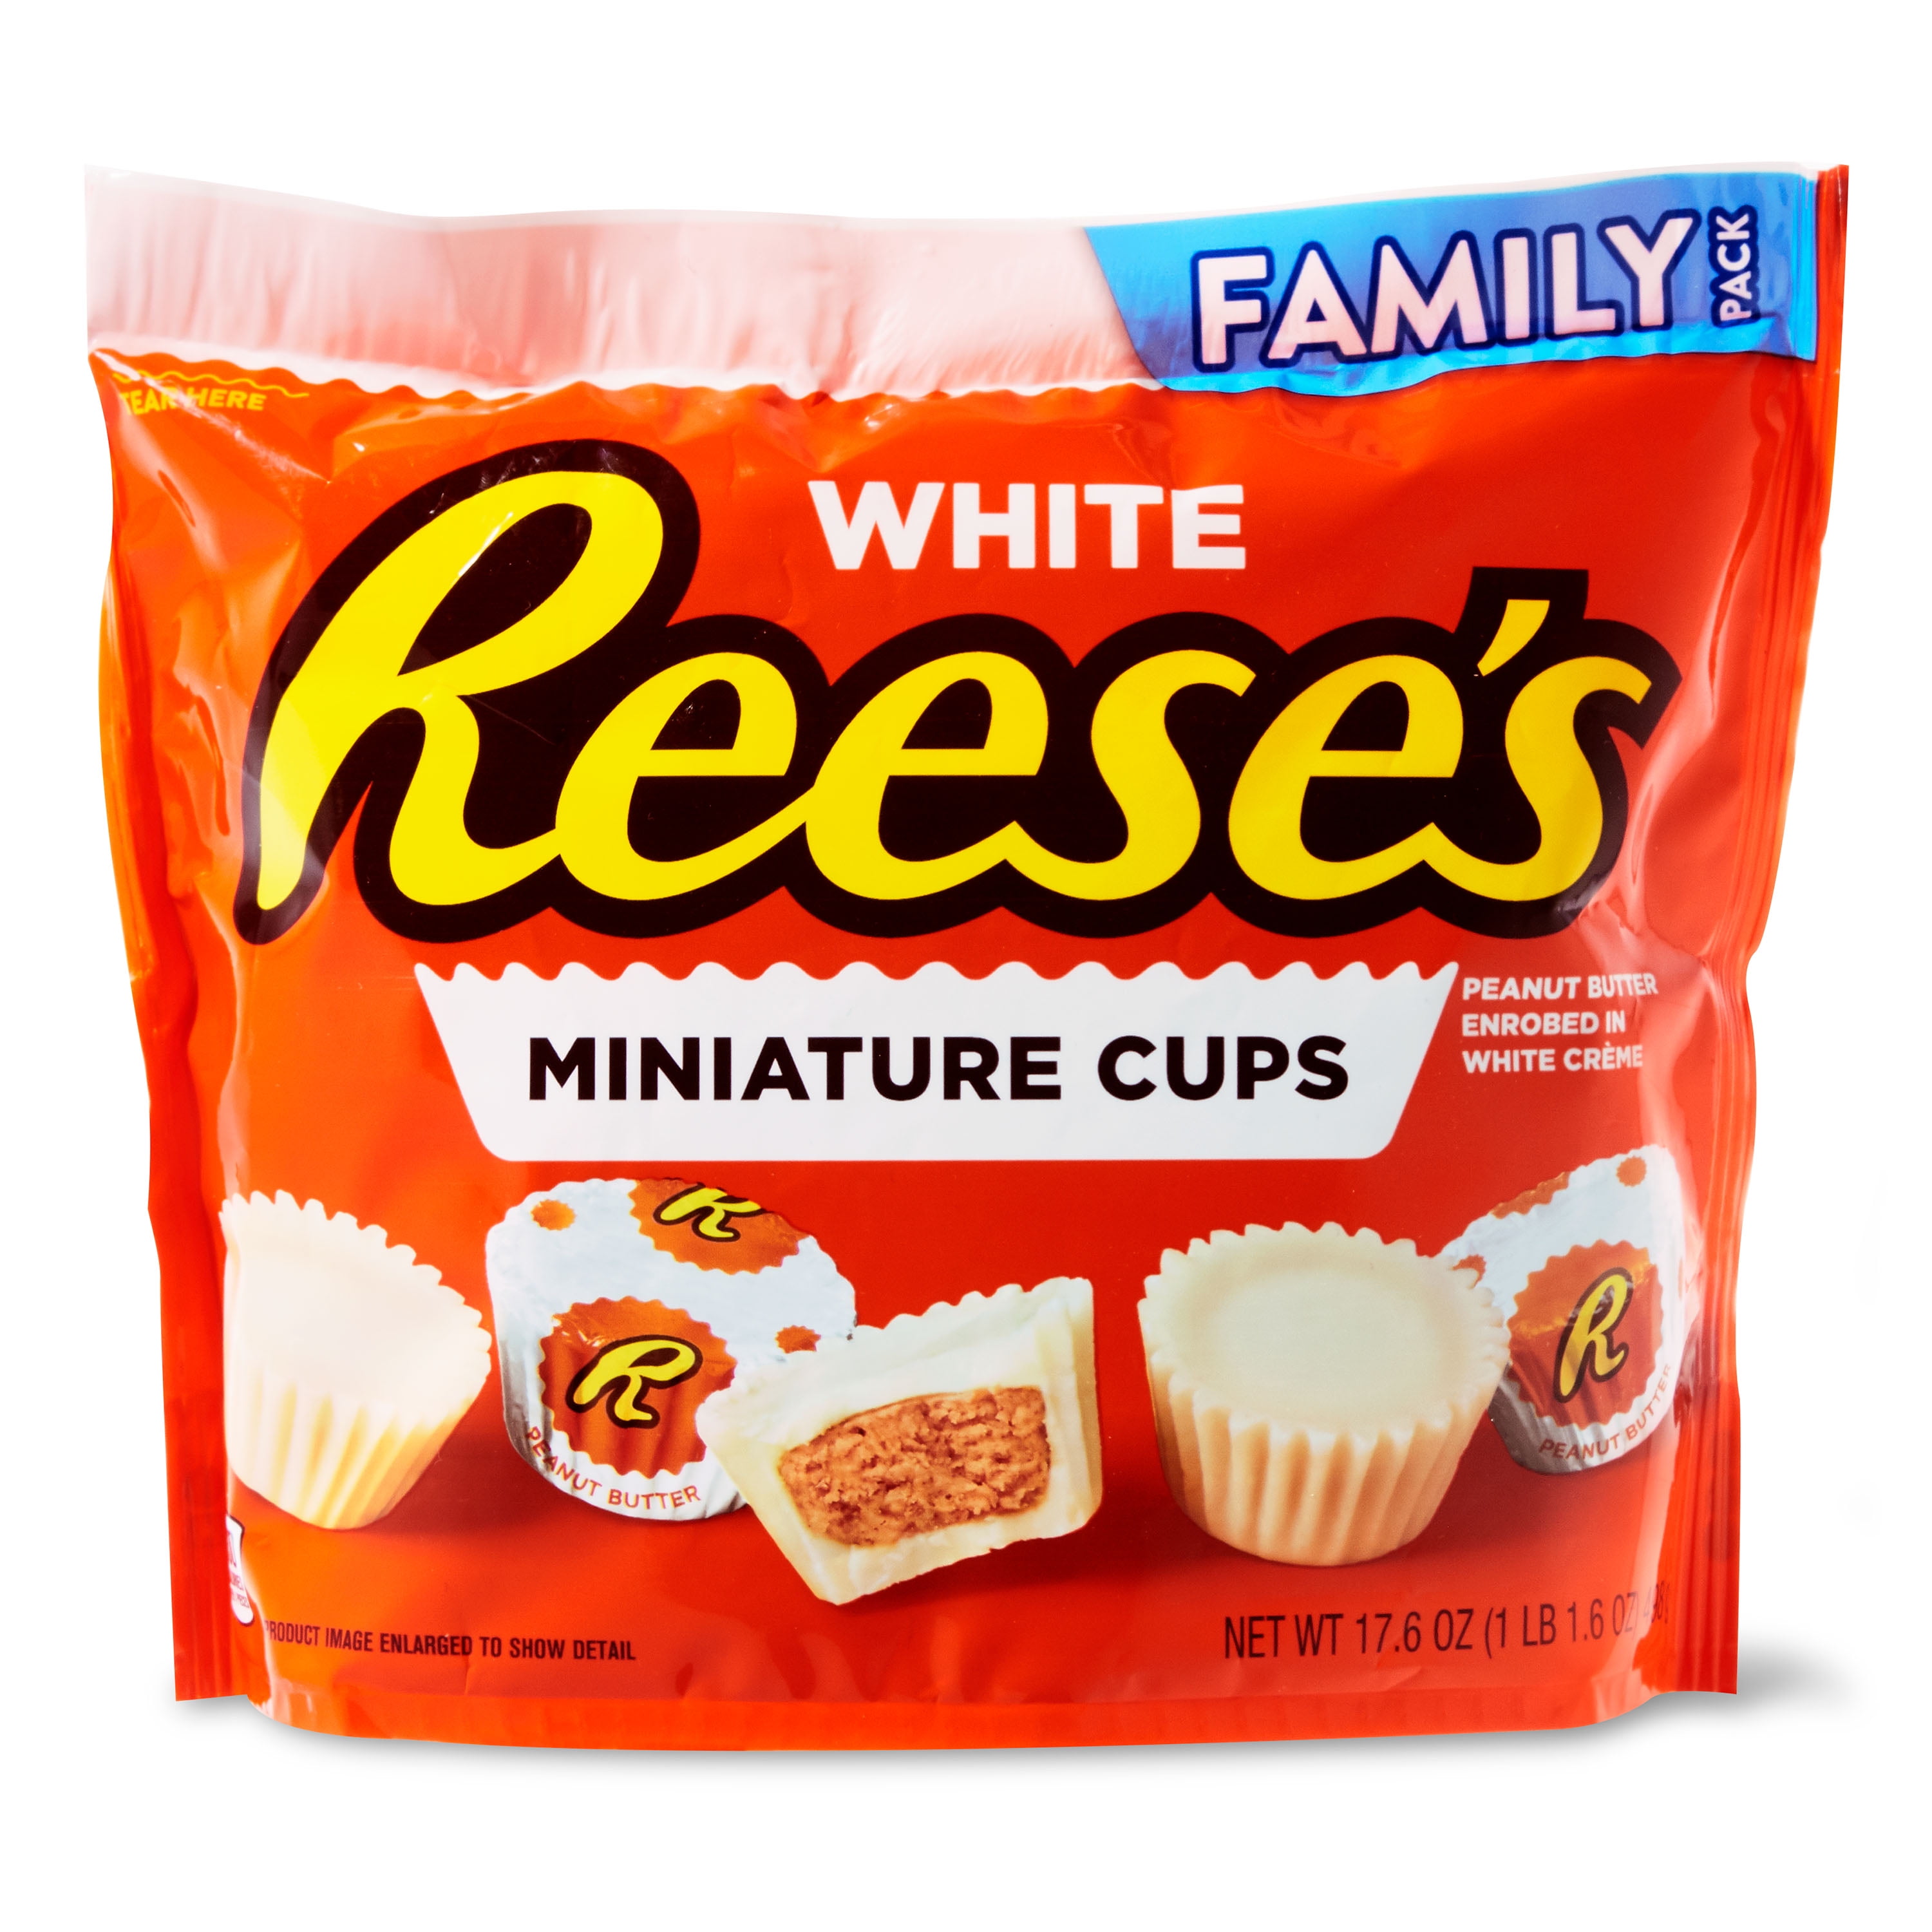 Reese's White Miniature Peanut Butter Cups, Family Pack, 17.6 oz ...